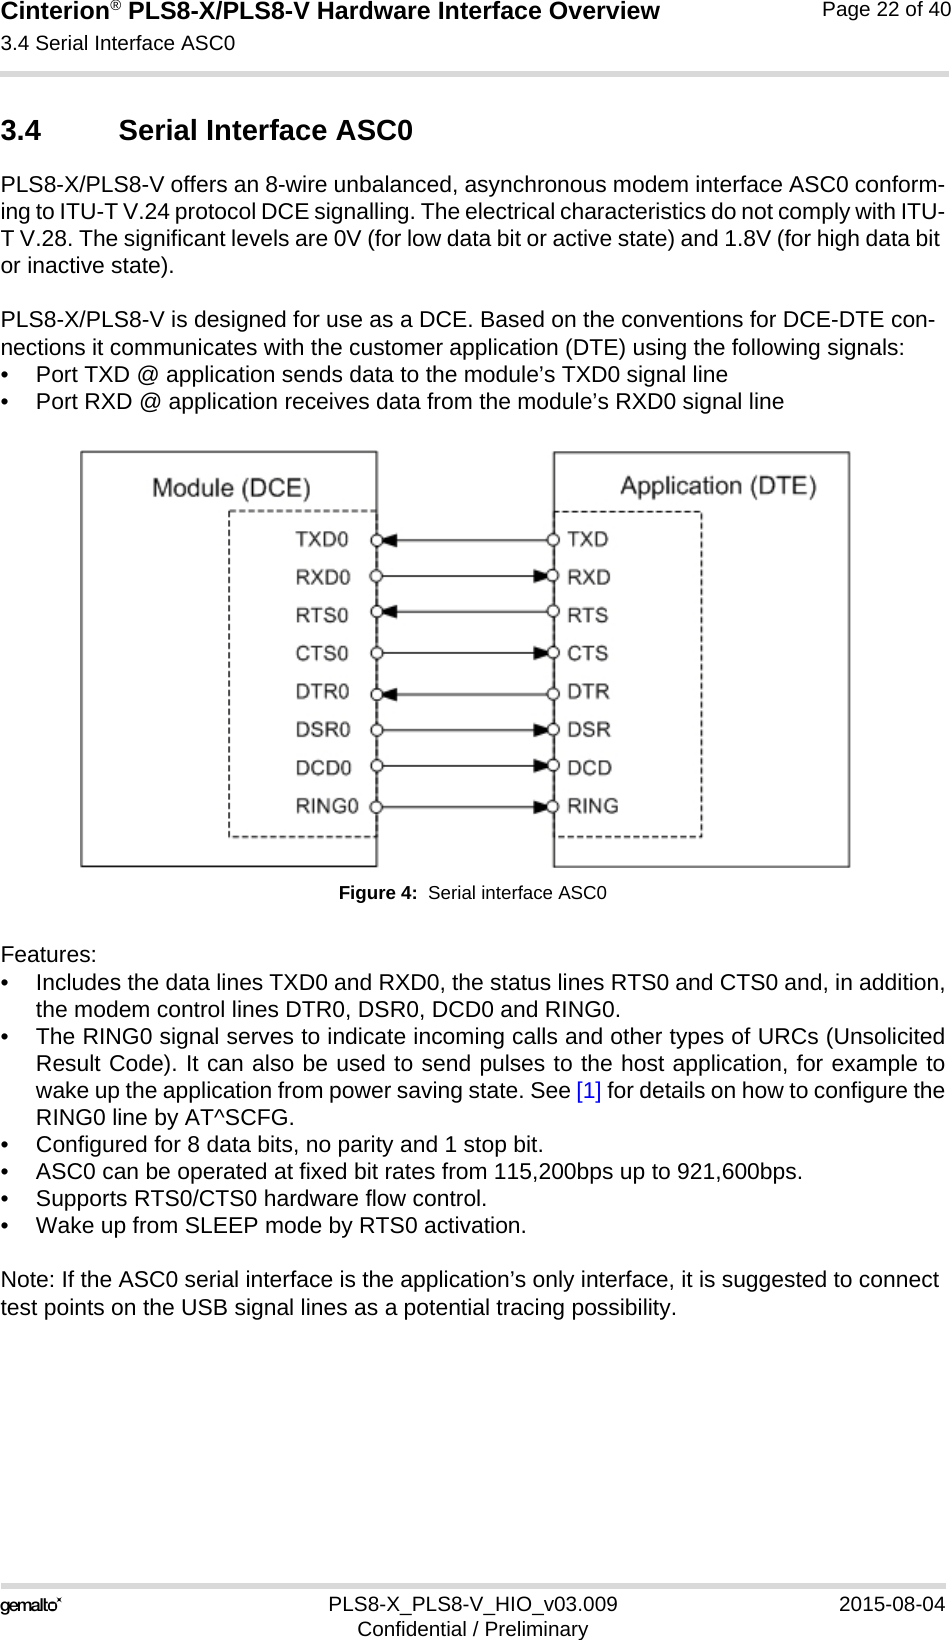 Cinterion® PLS8-X/PLS8-V Hardware Interface Overview3.4 Serial Interface ASC026PLS8-X_PLS8-V_HIO_v03.009 2015-08-04Confidential / PreliminaryPage 22 of 403.4 Serial Interface ASC0PLS8-X/PLS8-V offers an 8-wire unbalanced, asynchronous modem interface ASC0 conform-ing to ITU-T V.24 protocol DCE signalling. The electrical characteristics do not comply with ITU-T V.28. The significant levels are 0V (for low data bit or active state) and 1.8V (for high data bit or inactive state). PLS8-X/PLS8-V is designed for use as a DCE. Based on the conventions for DCE-DTE con-nections it communicates with the customer application (DTE) using the following signals:• Port TXD @ application sends data to the module’s TXD0 signal line• Port RXD @ application receives data from the module’s RXD0 signal lineFigure 4:  Serial interface ASC0Features:• Includes the data lines TXD0 and RXD0, the status lines RTS0 and CTS0 and, in addition,the modem control lines DTR0, DSR0, DCD0 and RING0.• The RING0 signal serves to indicate incoming calls and other types of URCs (UnsolicitedResult Code). It can also be used to send pulses to the host application, for example towake up the application from power saving state. See [1] for details on how to configure theRING0 line by AT^SCFG.• Configured for 8 data bits, no parity and 1 stop bit. • ASC0 can be operated at fixed bit rates from 115,200bps up to 921,600bps.• Supports RTS0/CTS0 hardware flow control.• Wake up from SLEEP mode by RTS0 activation.Note: If the ASC0 serial interface is the application’s only interface, it is suggested to connect test points on the USB signal lines as a potential tracing possibility.